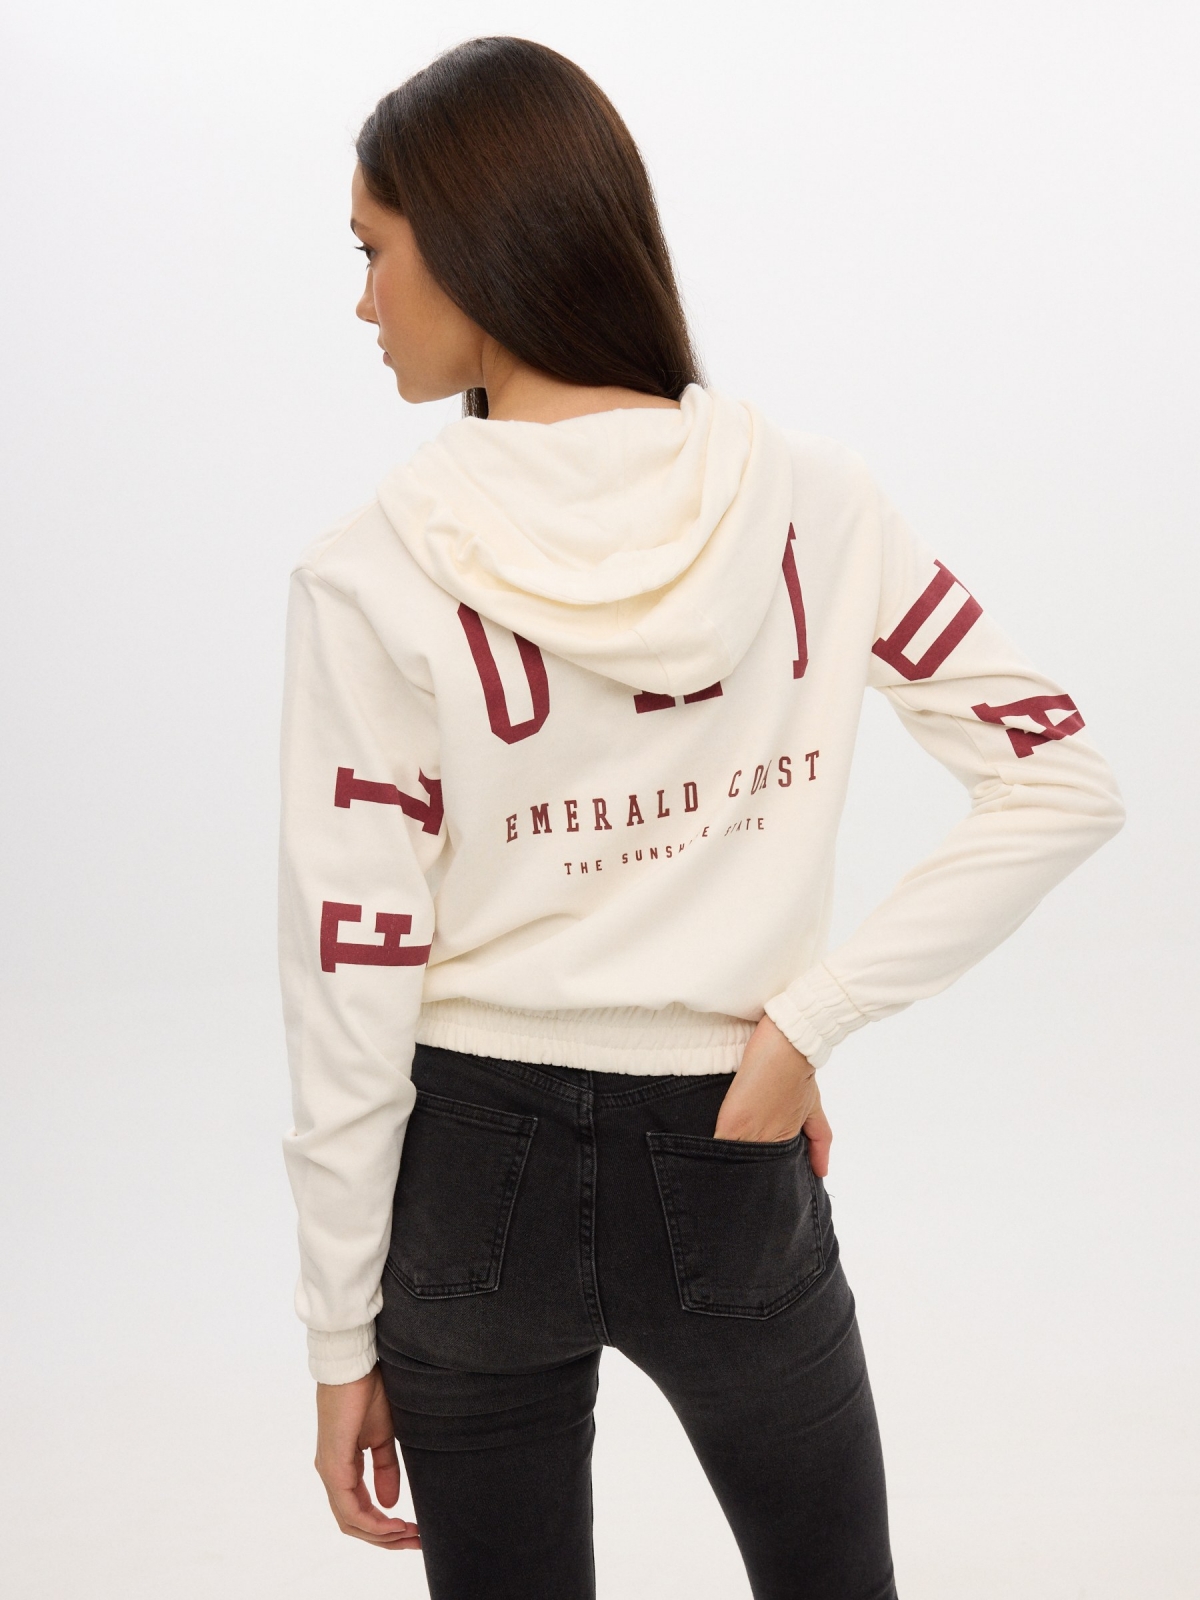 Open hooded sweatshirt off white middle back view